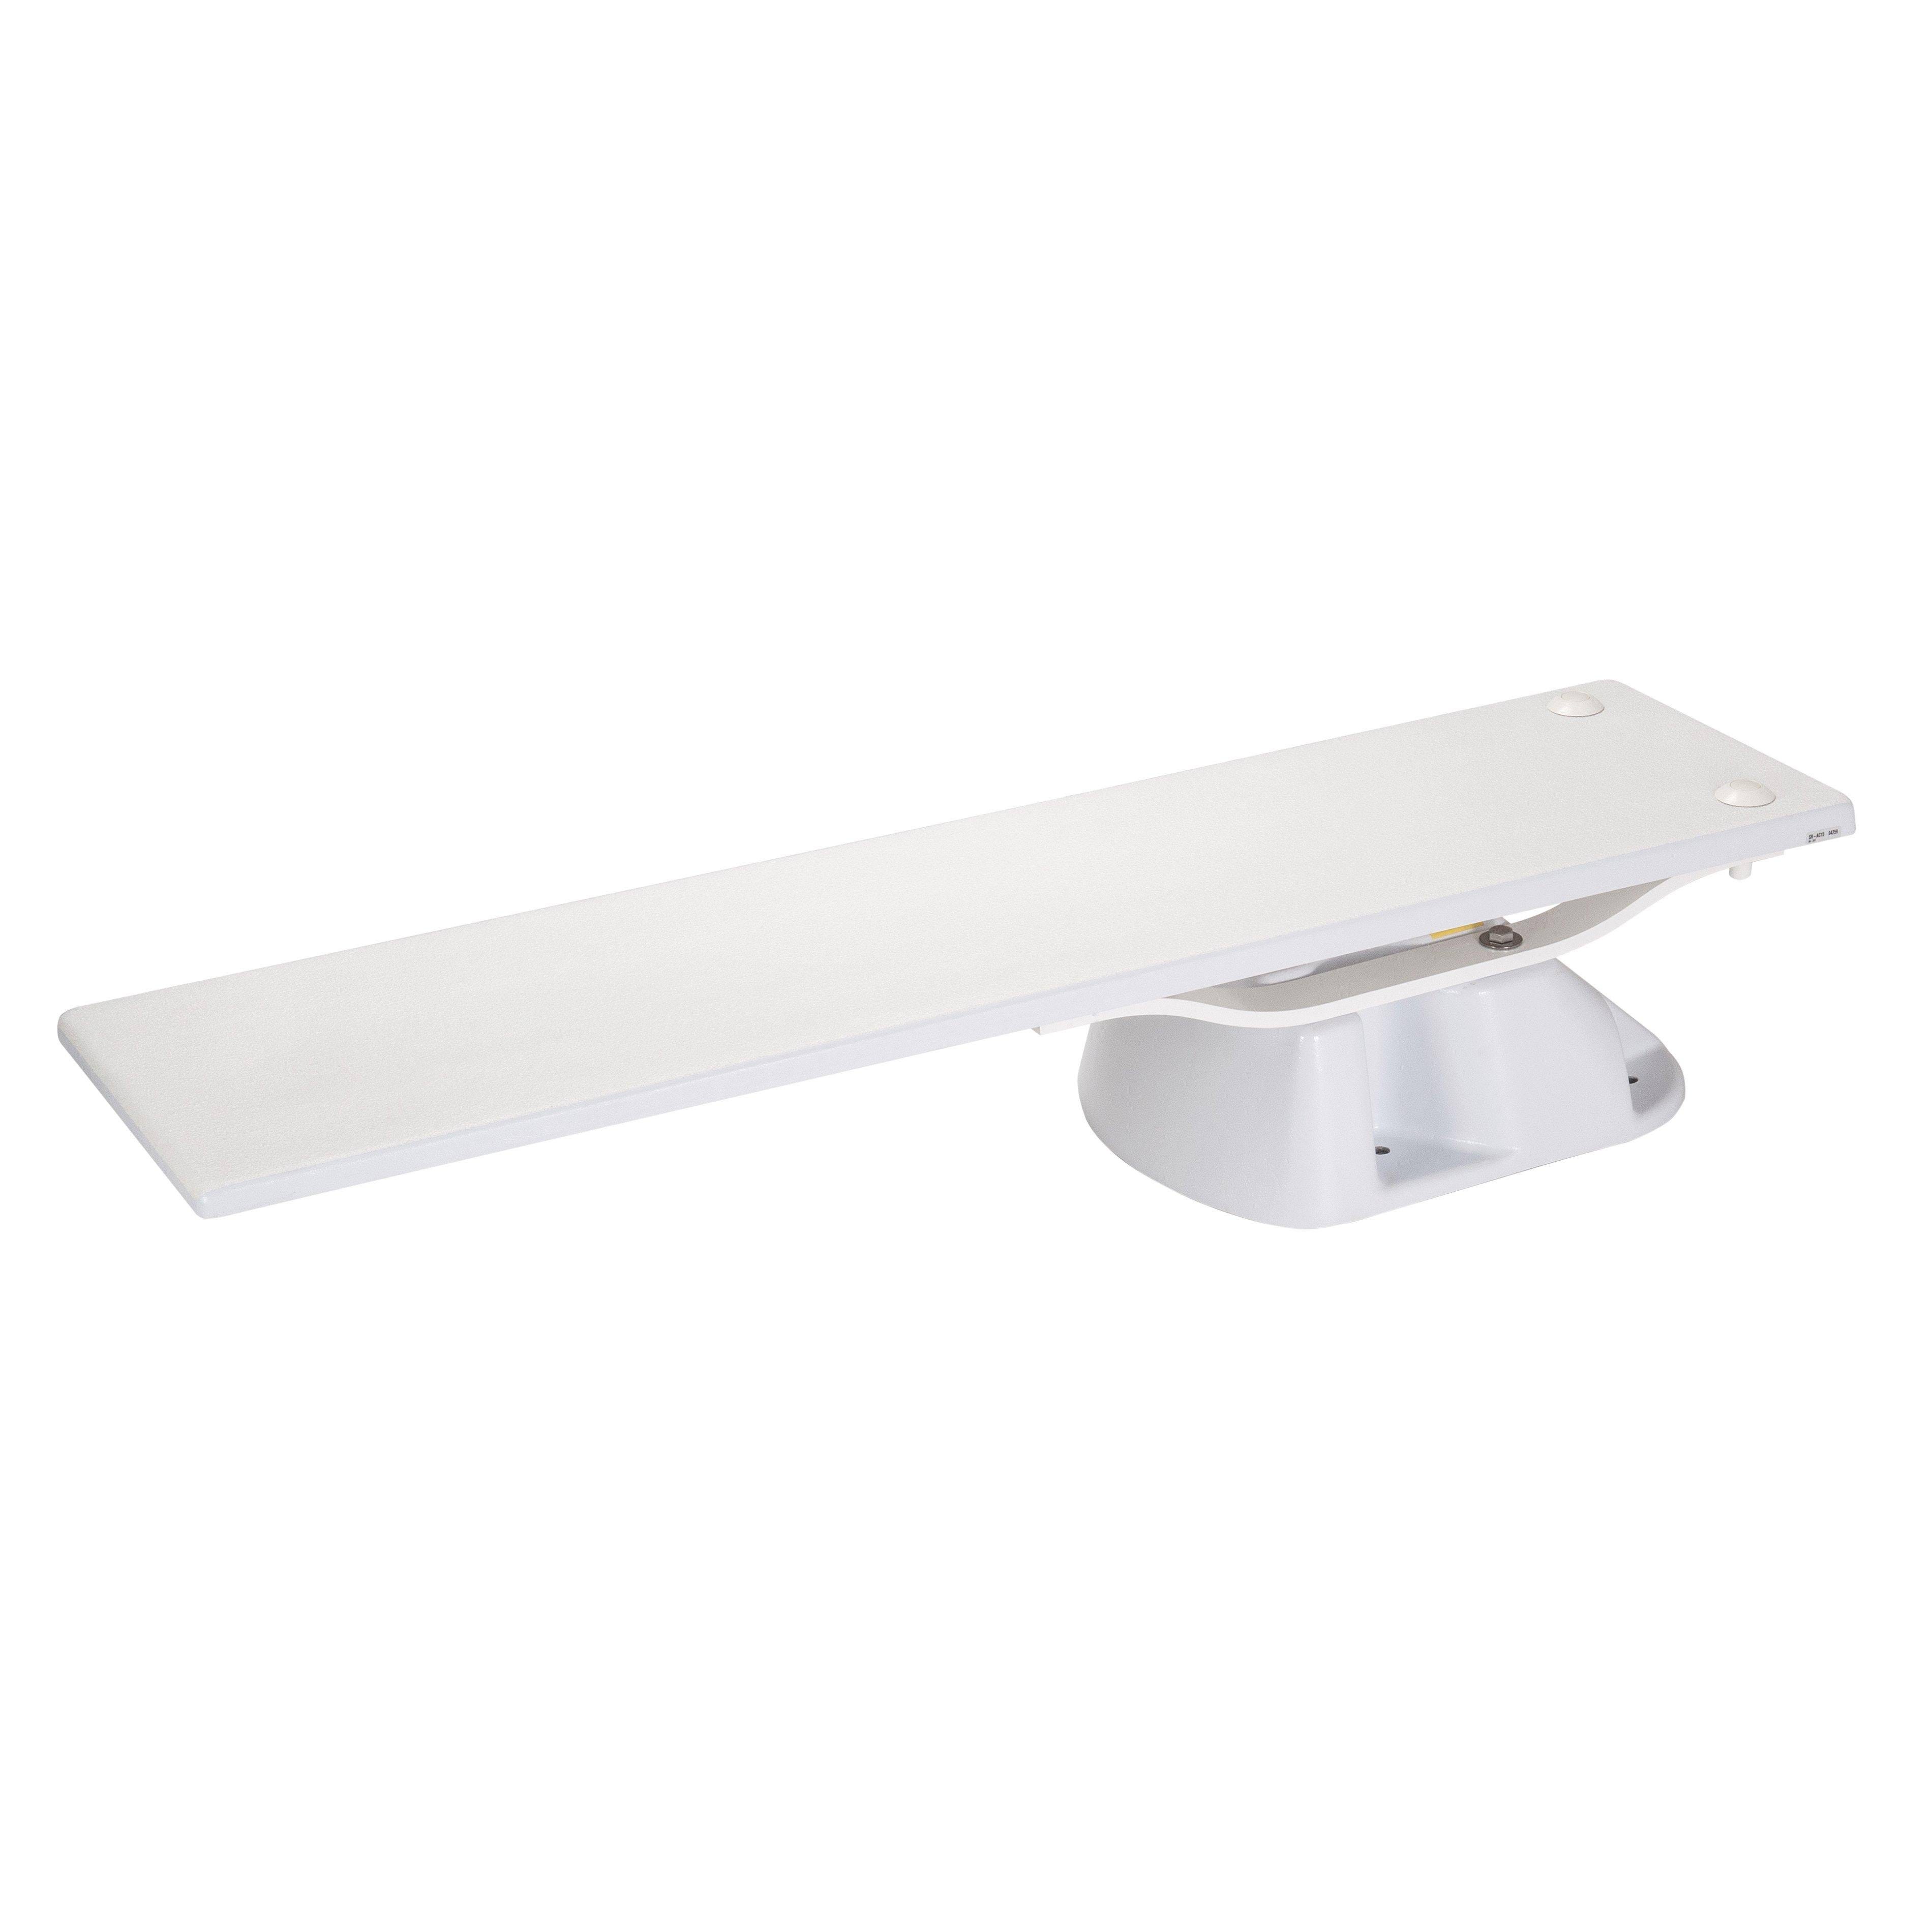 Stylish Saltwater-Ready 6-Foot Diving Board for Safety and Comfort | Image